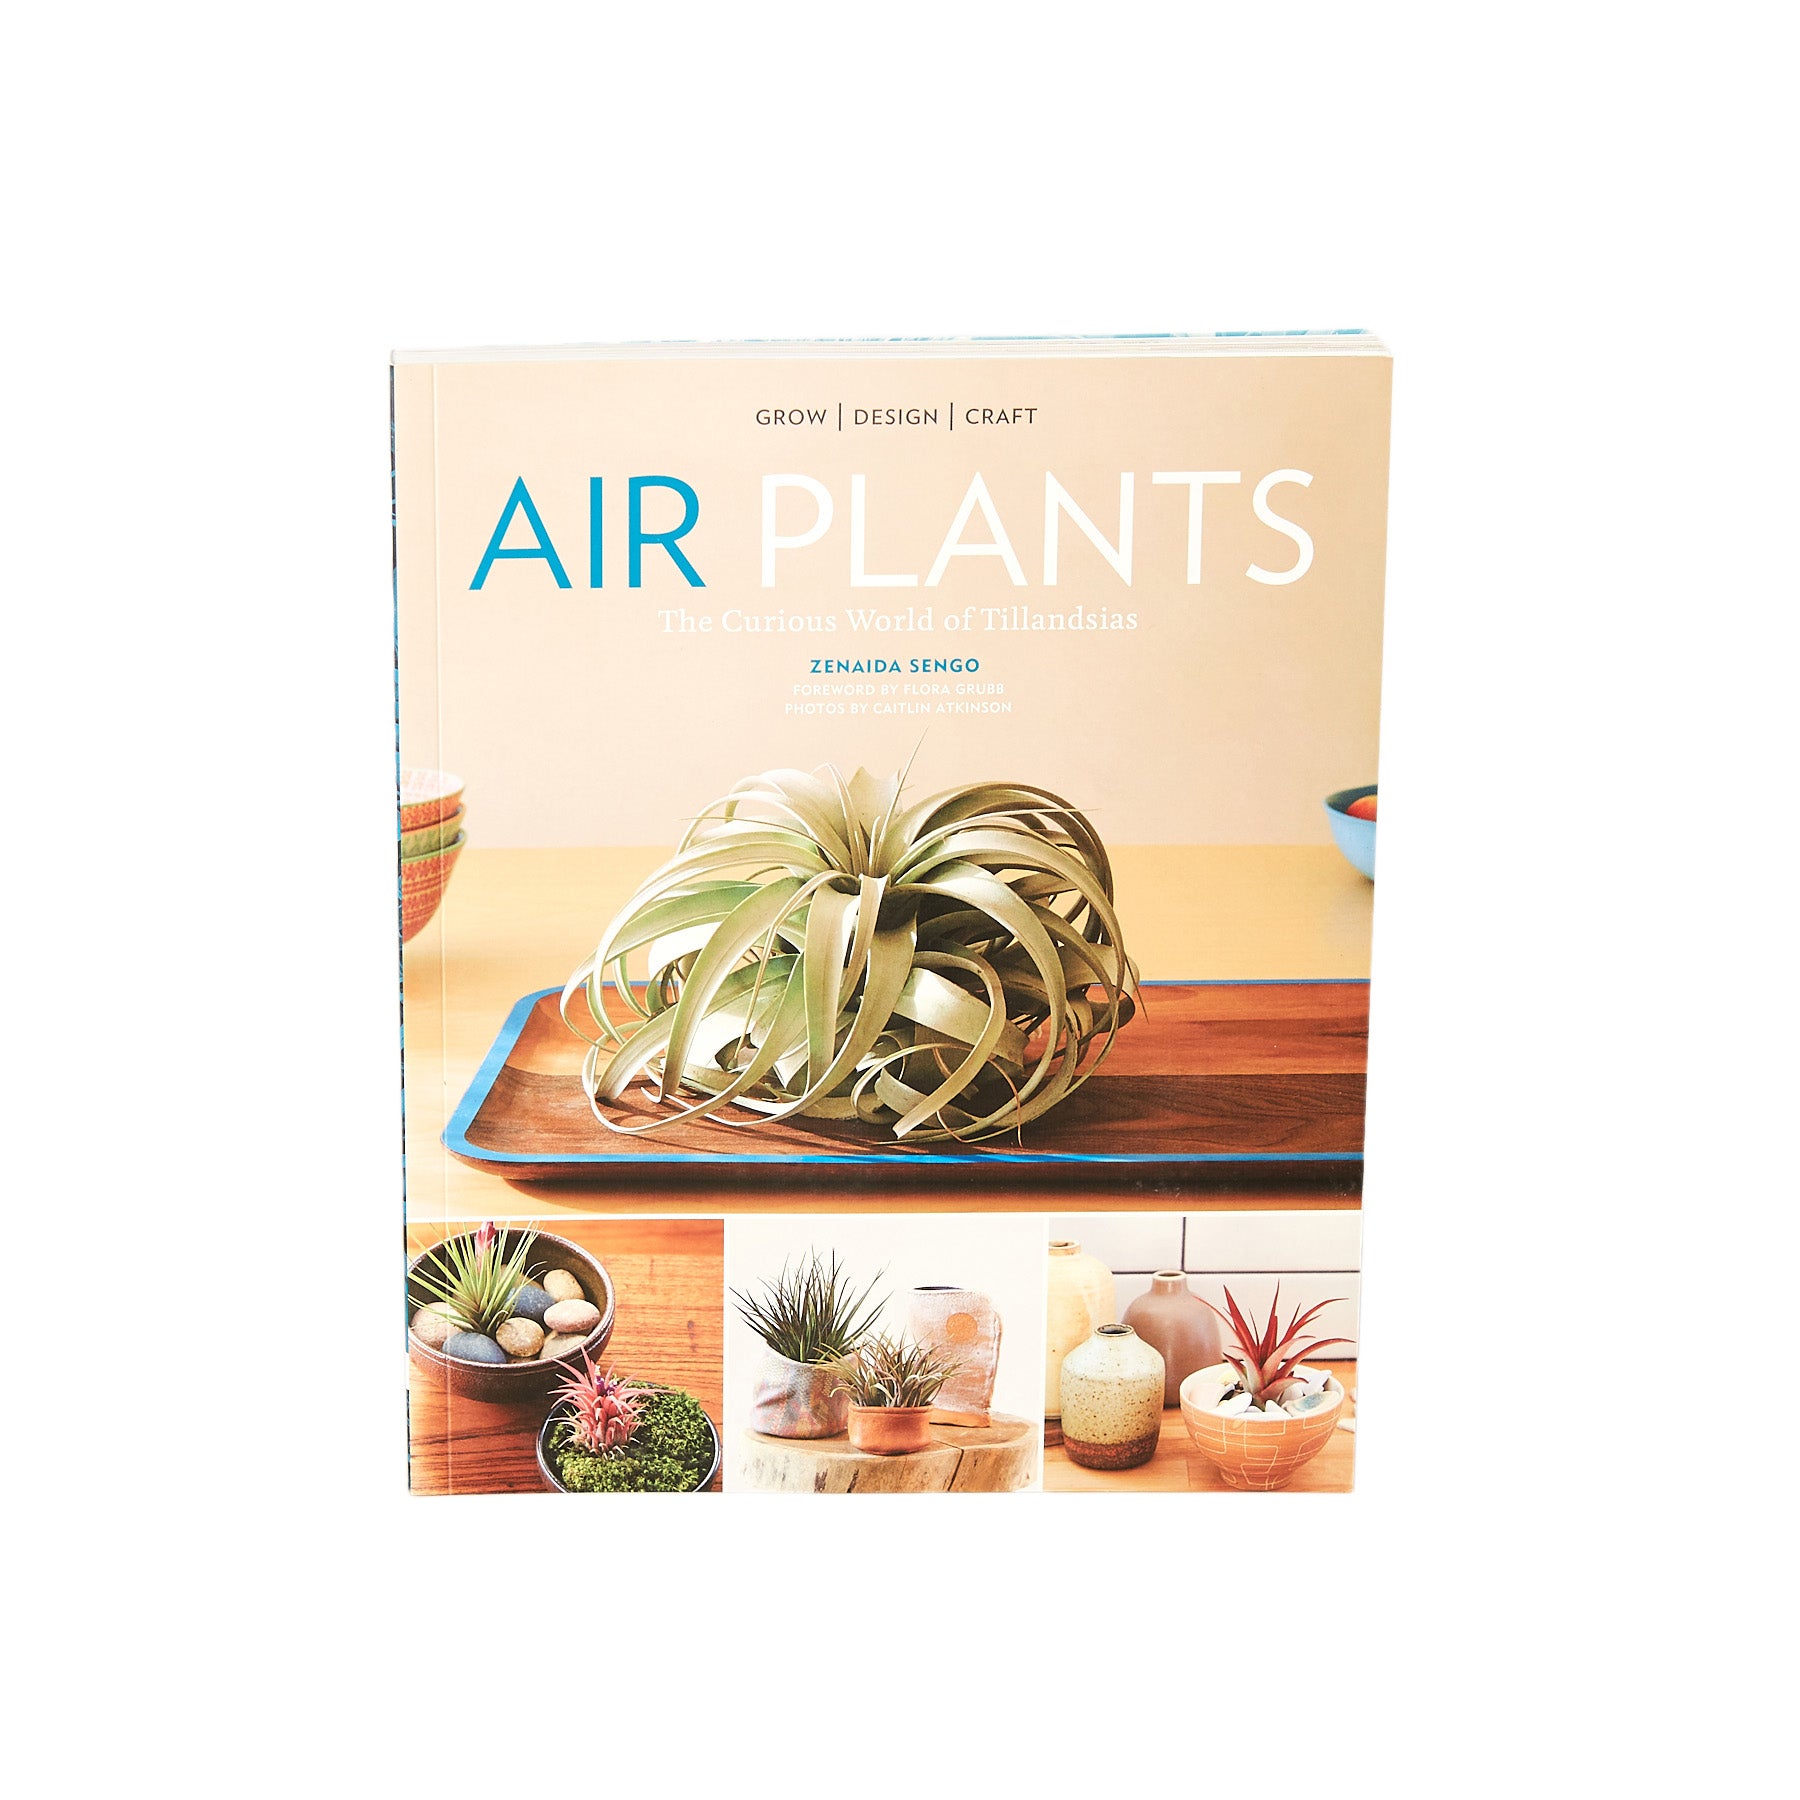 The air plants book is displayed on a table at one of the top plant nurseries near me.